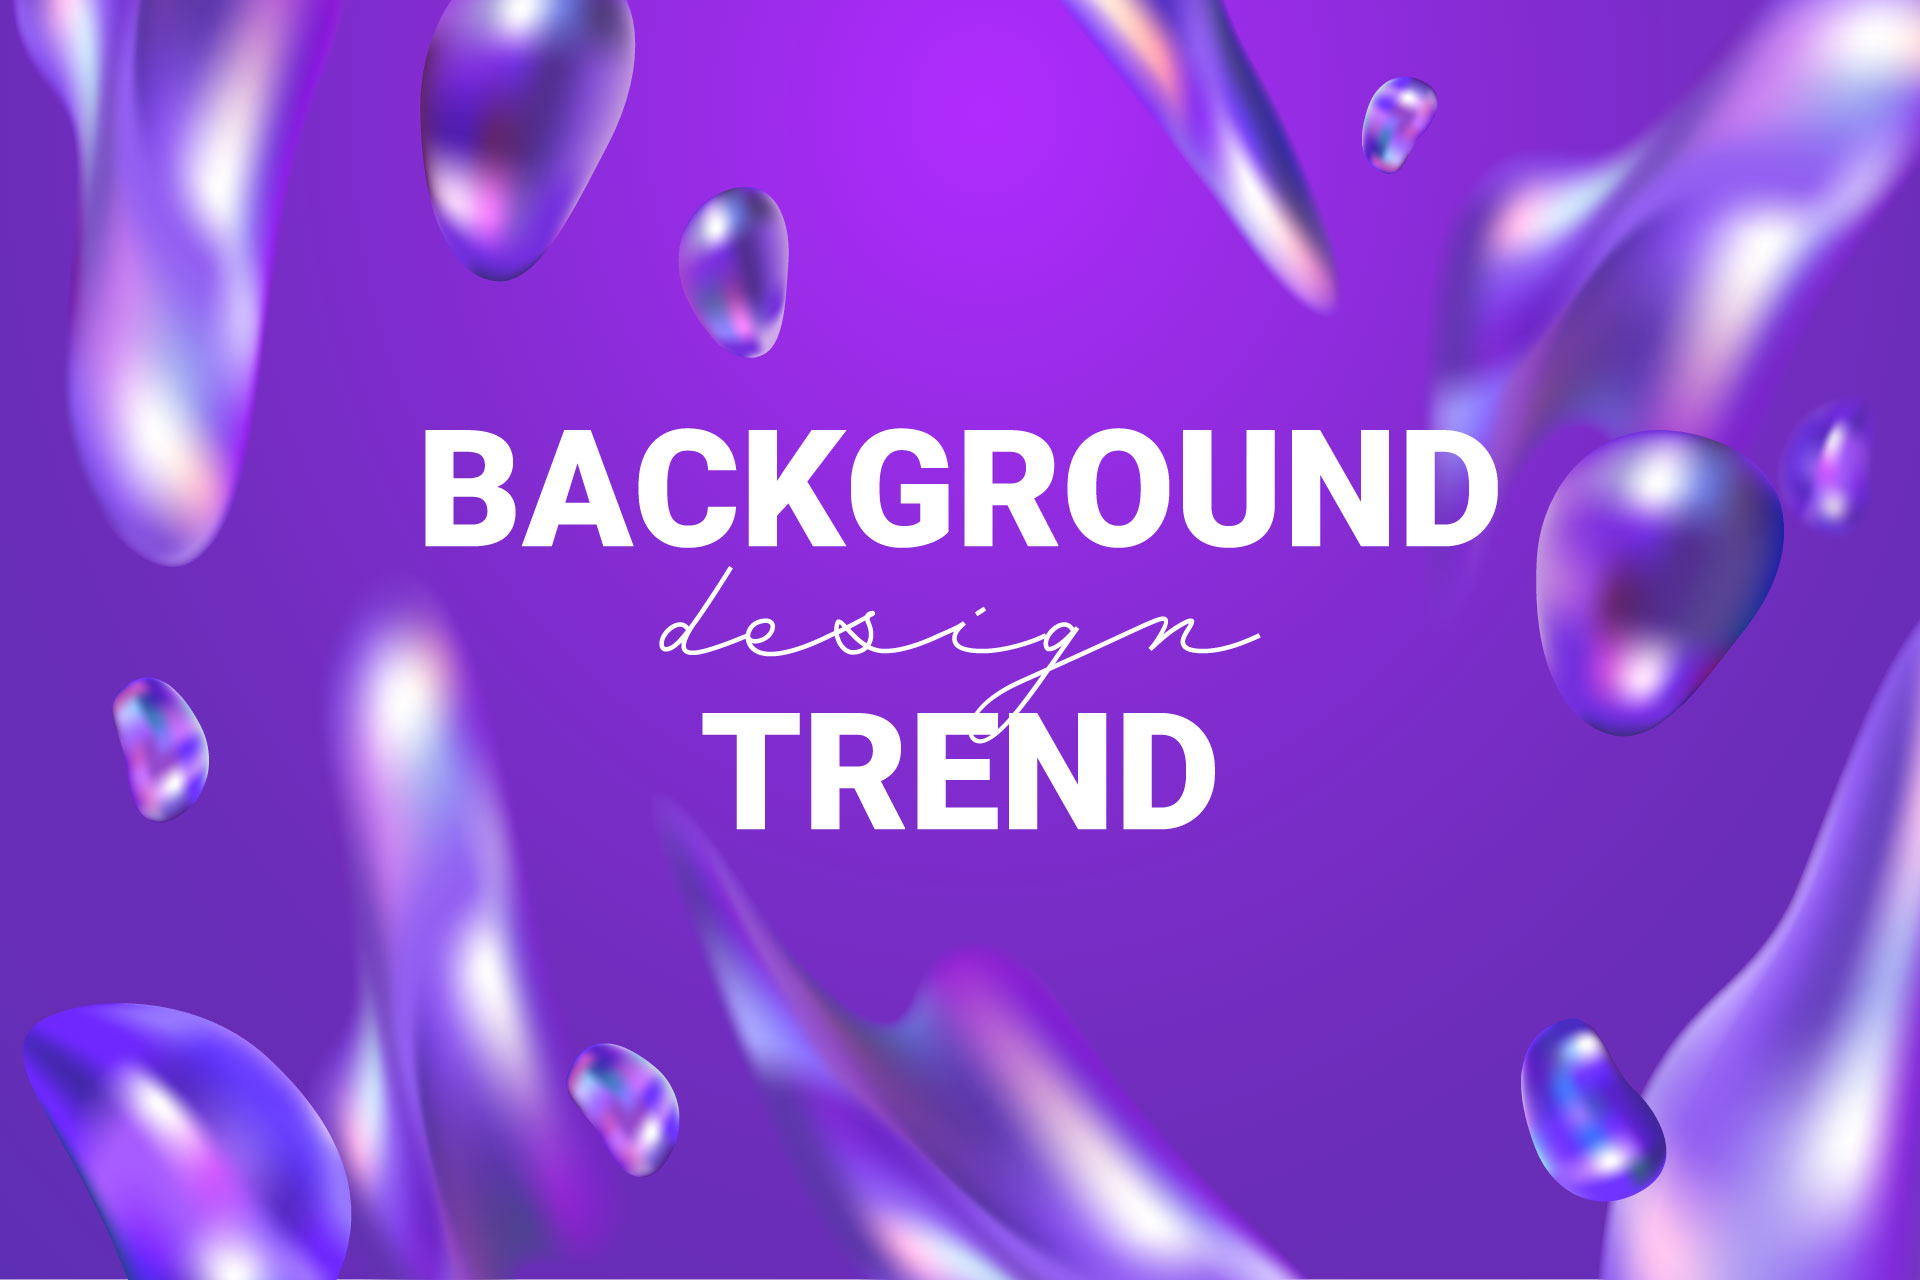 13 Awesome Background Design Trends and Styles for 2022